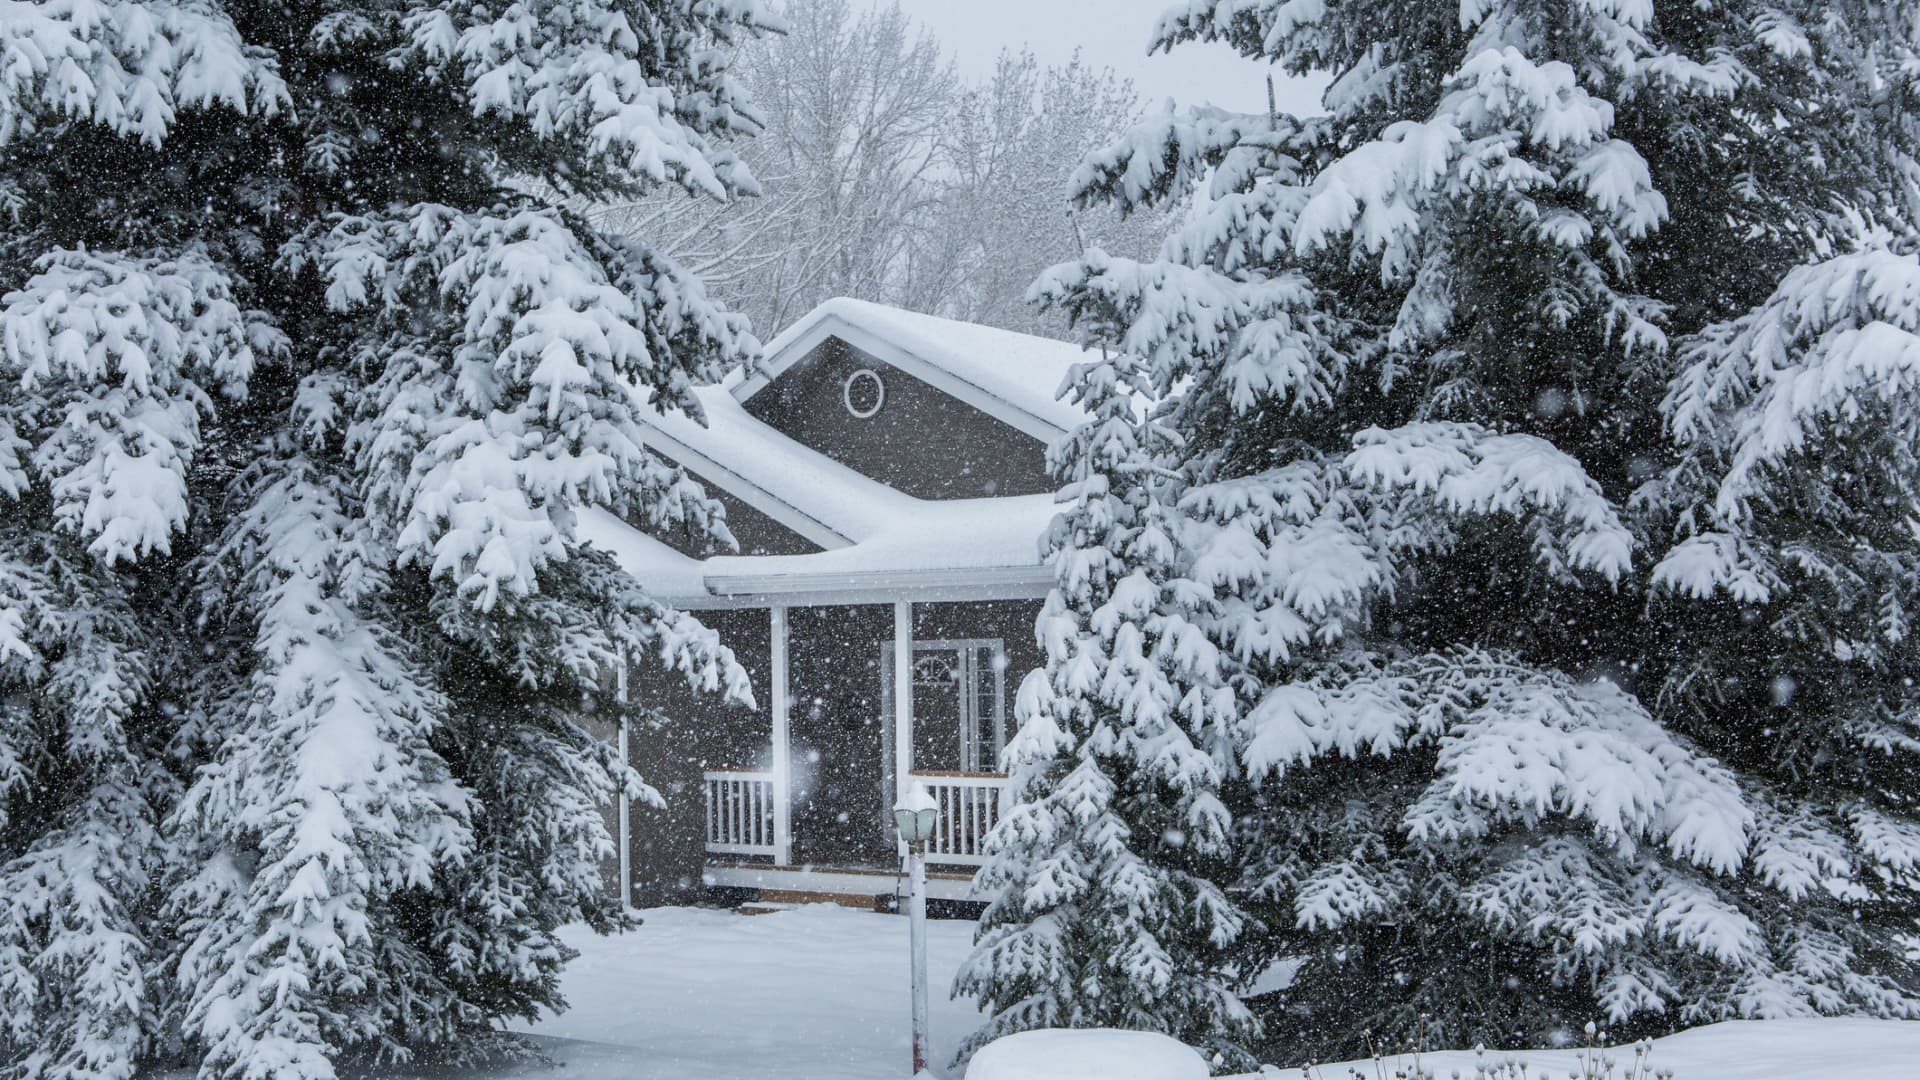 How a tax break of up to $3,200 can help heat your home more efficiently this winter